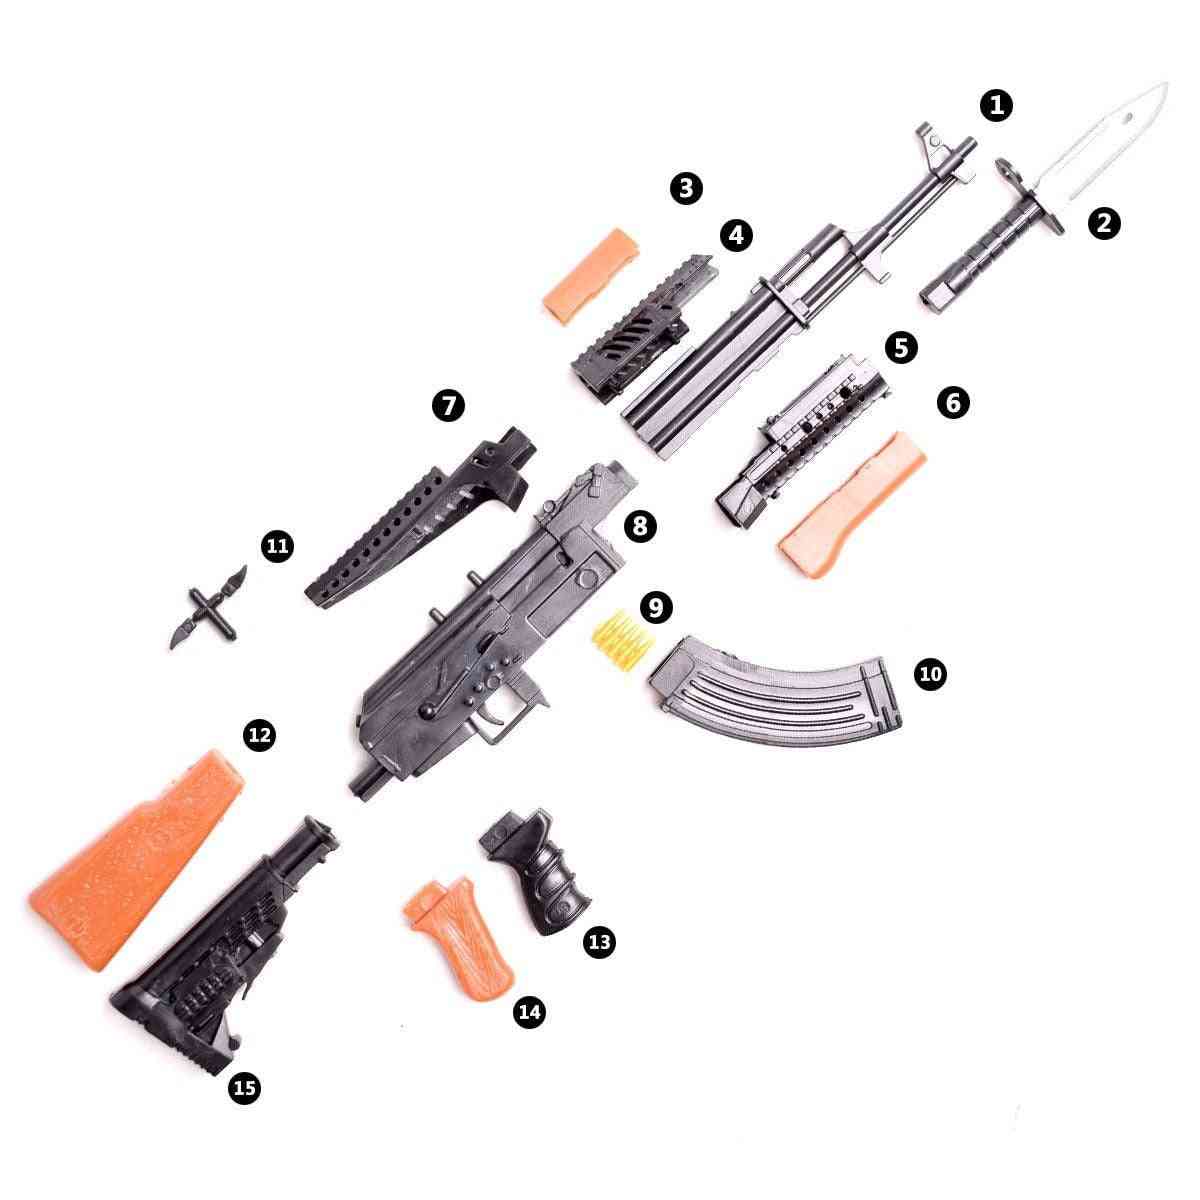 Toy Gun Model Assembly Puzzles Building Bricks